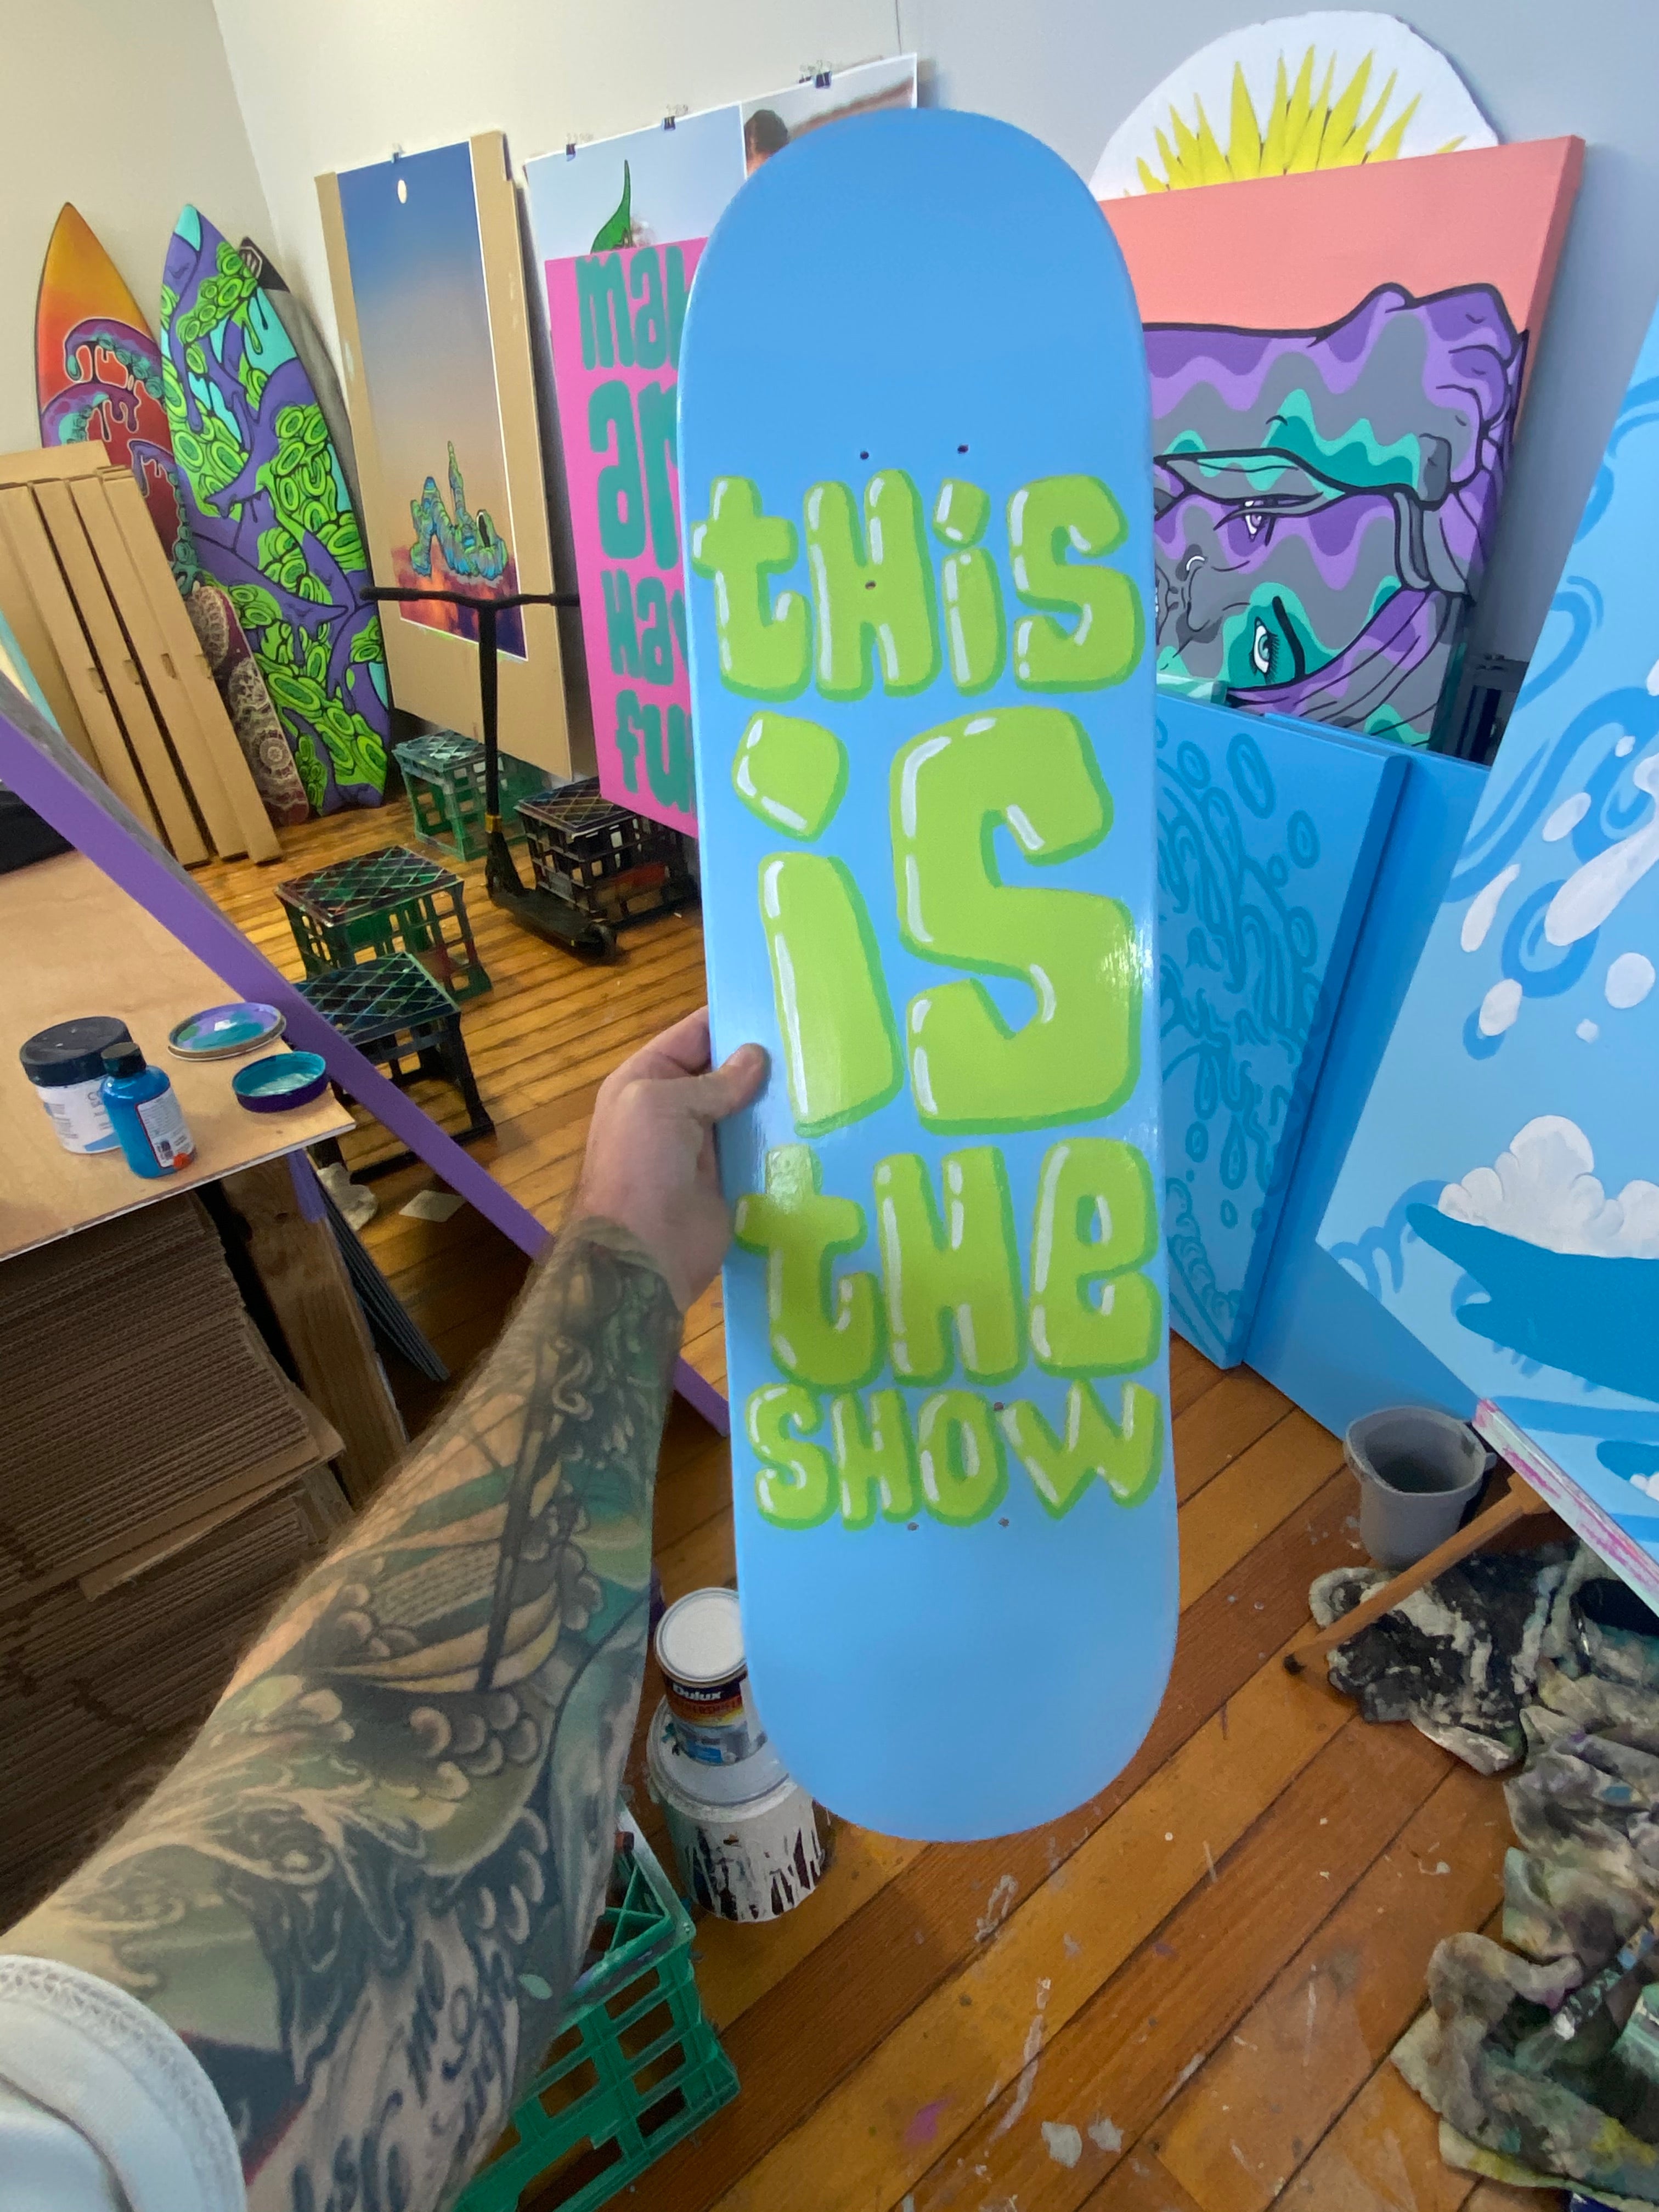 Original: This is the Show! Skateboard Art.